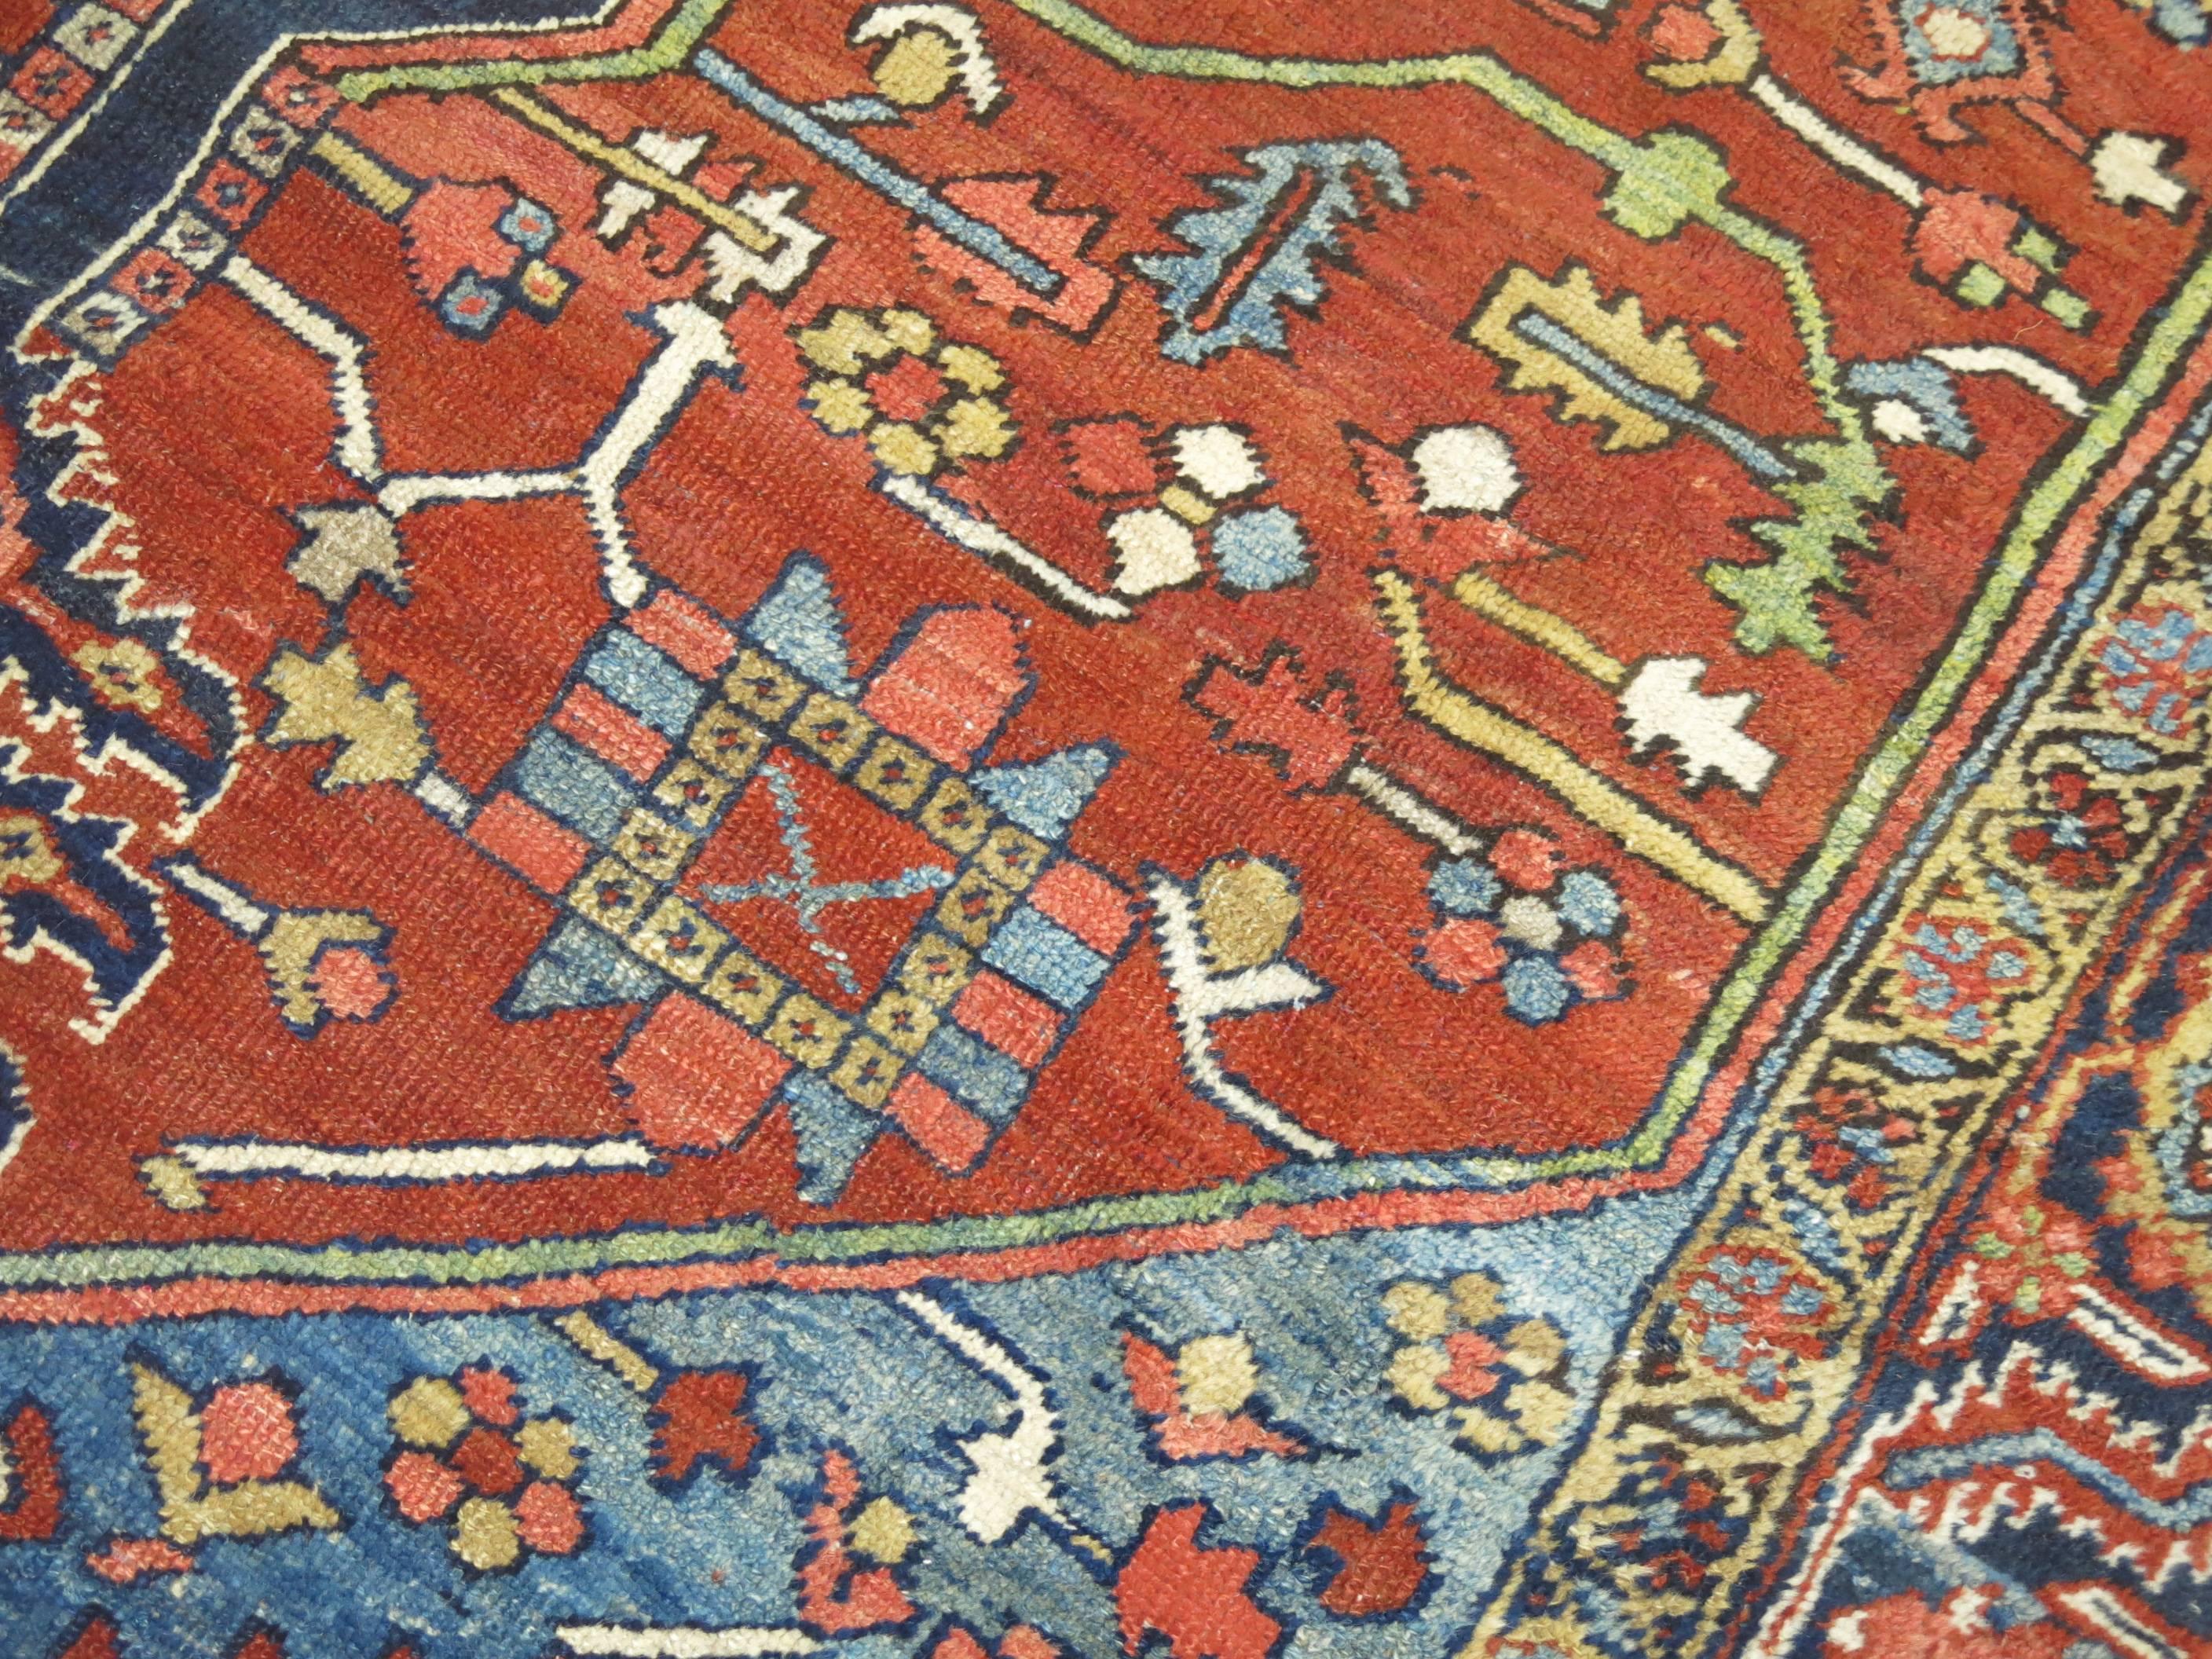 Lovely Persian Heriz rug featuring French blue colored corners on a spacious medallion and border motif.